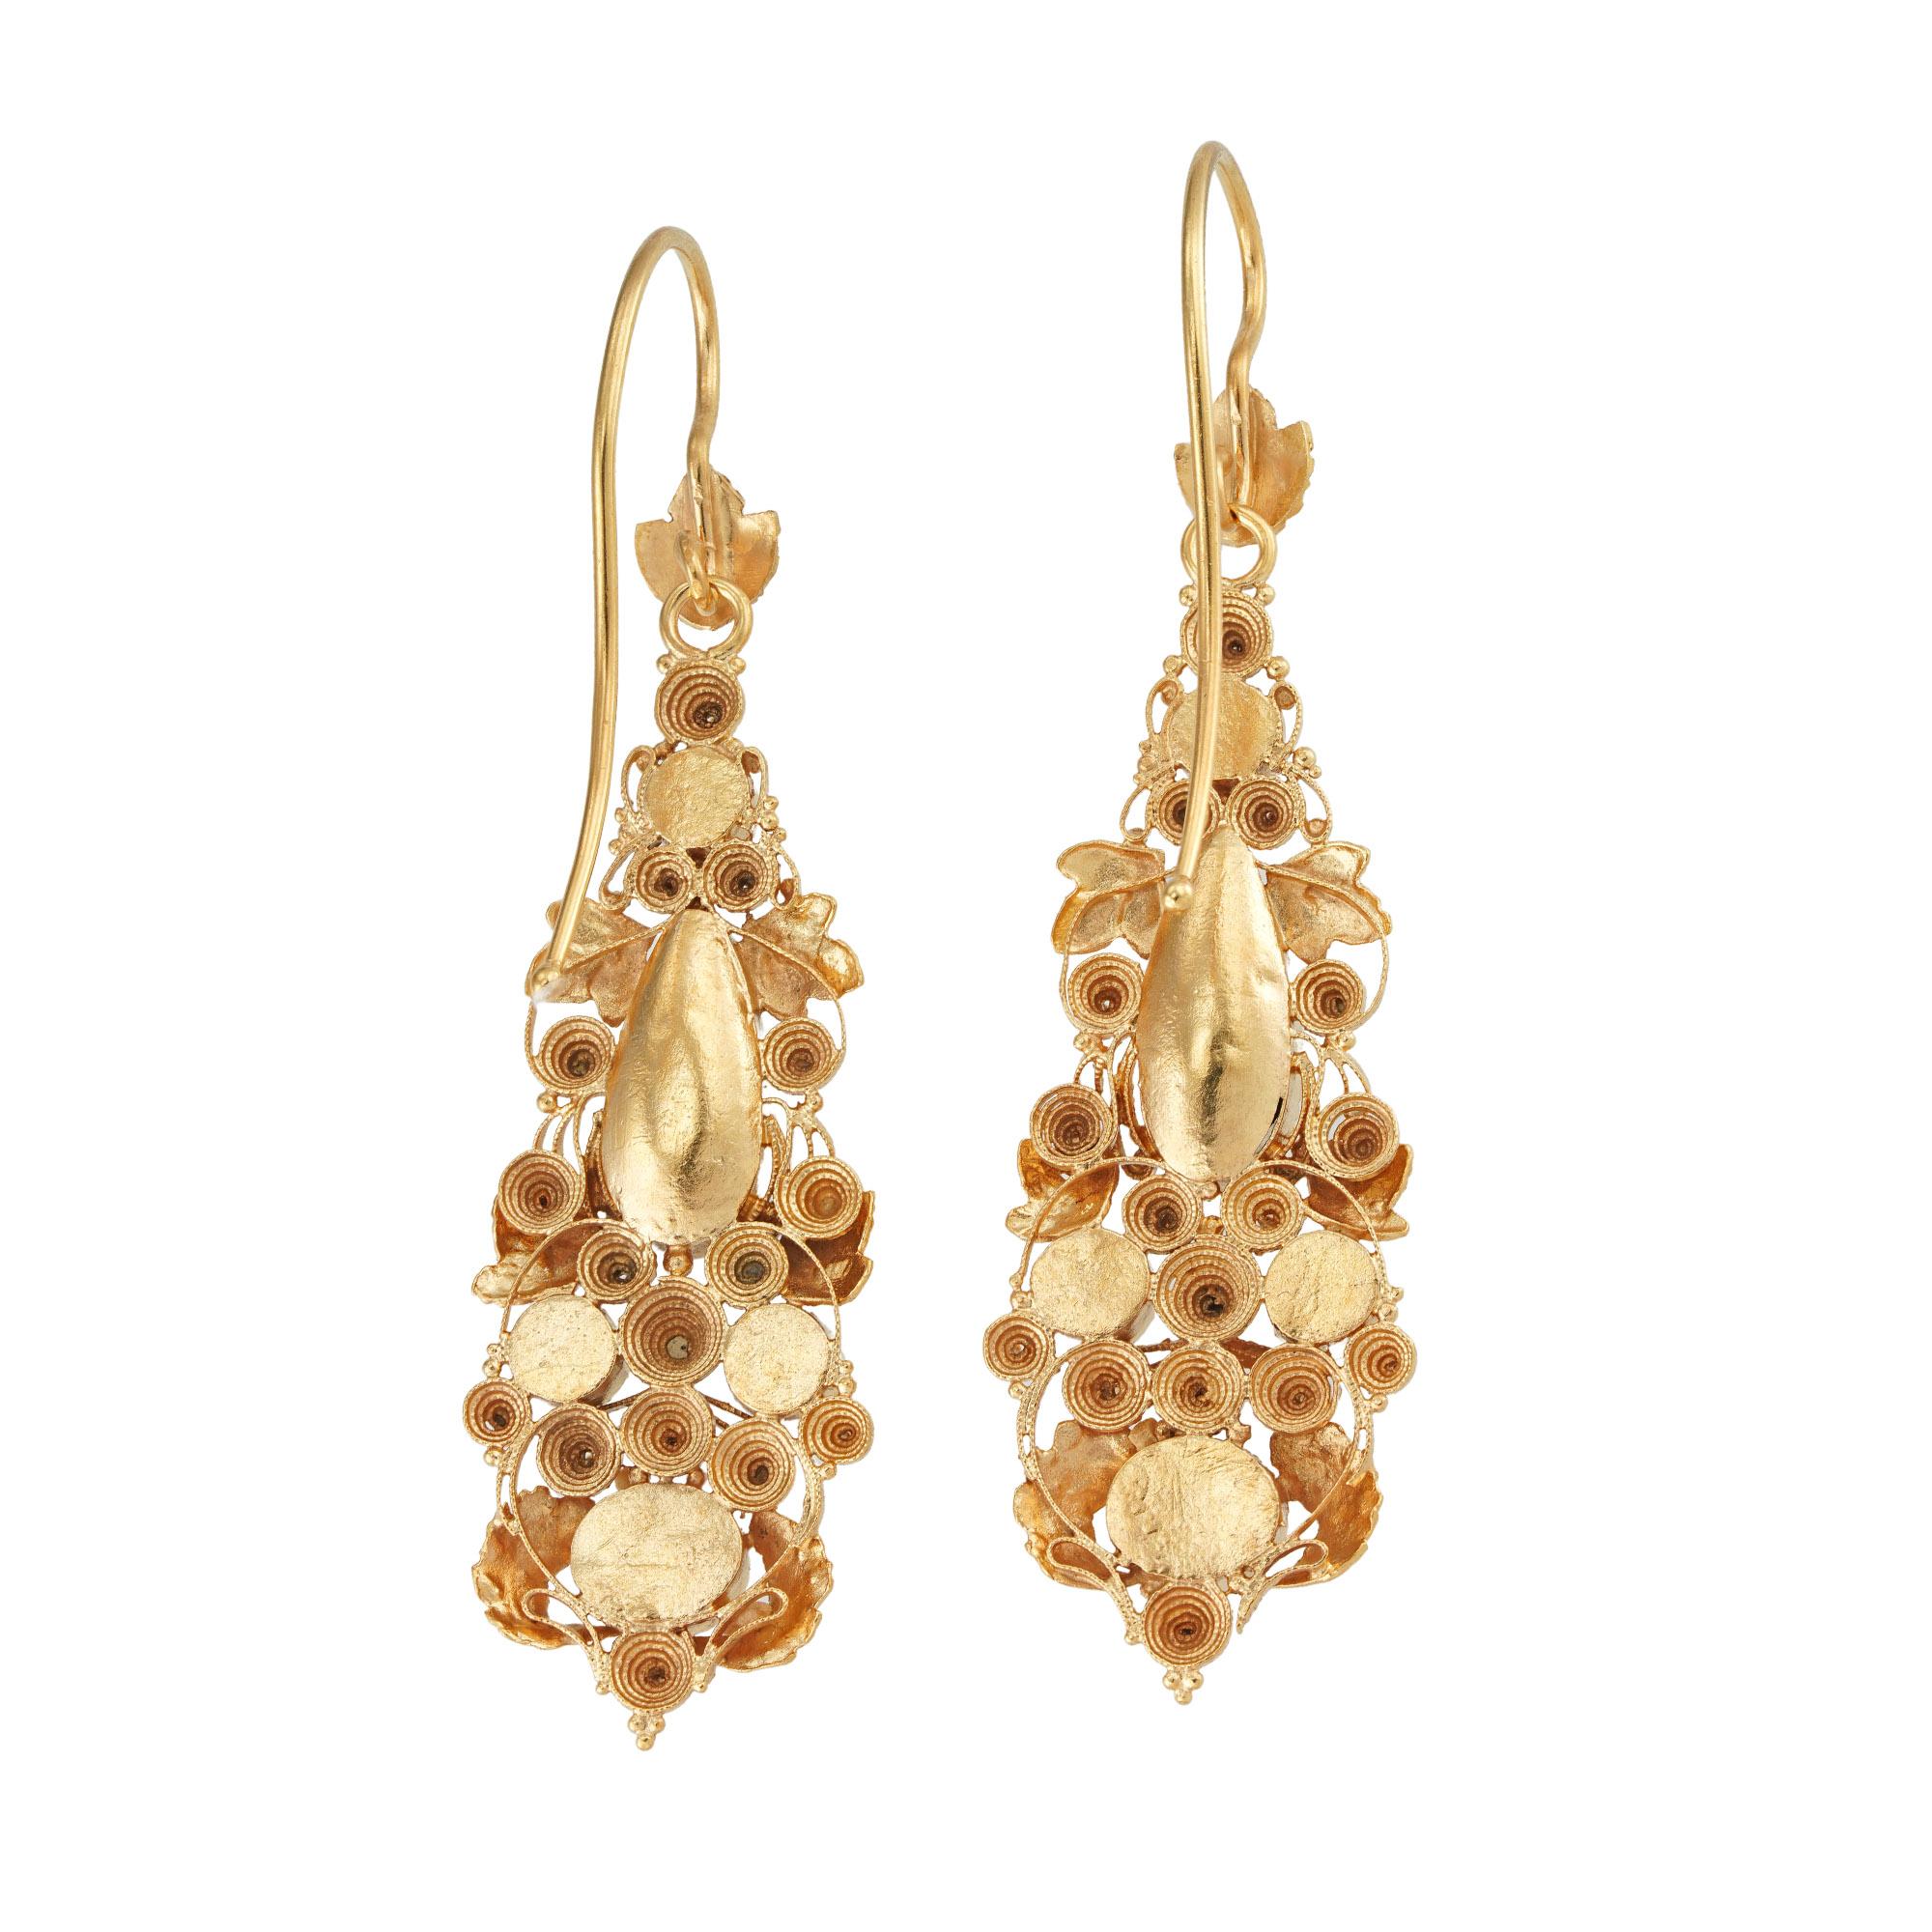 A pair of Regency yellow gold and gemset cannetille earrings, the golden topaz earrings set within three colour gold cannetille work in a foliate style, with gold hook fittings, circa 1820, measuring approximately 4.5 x 1.4cm, gross weight 6.5